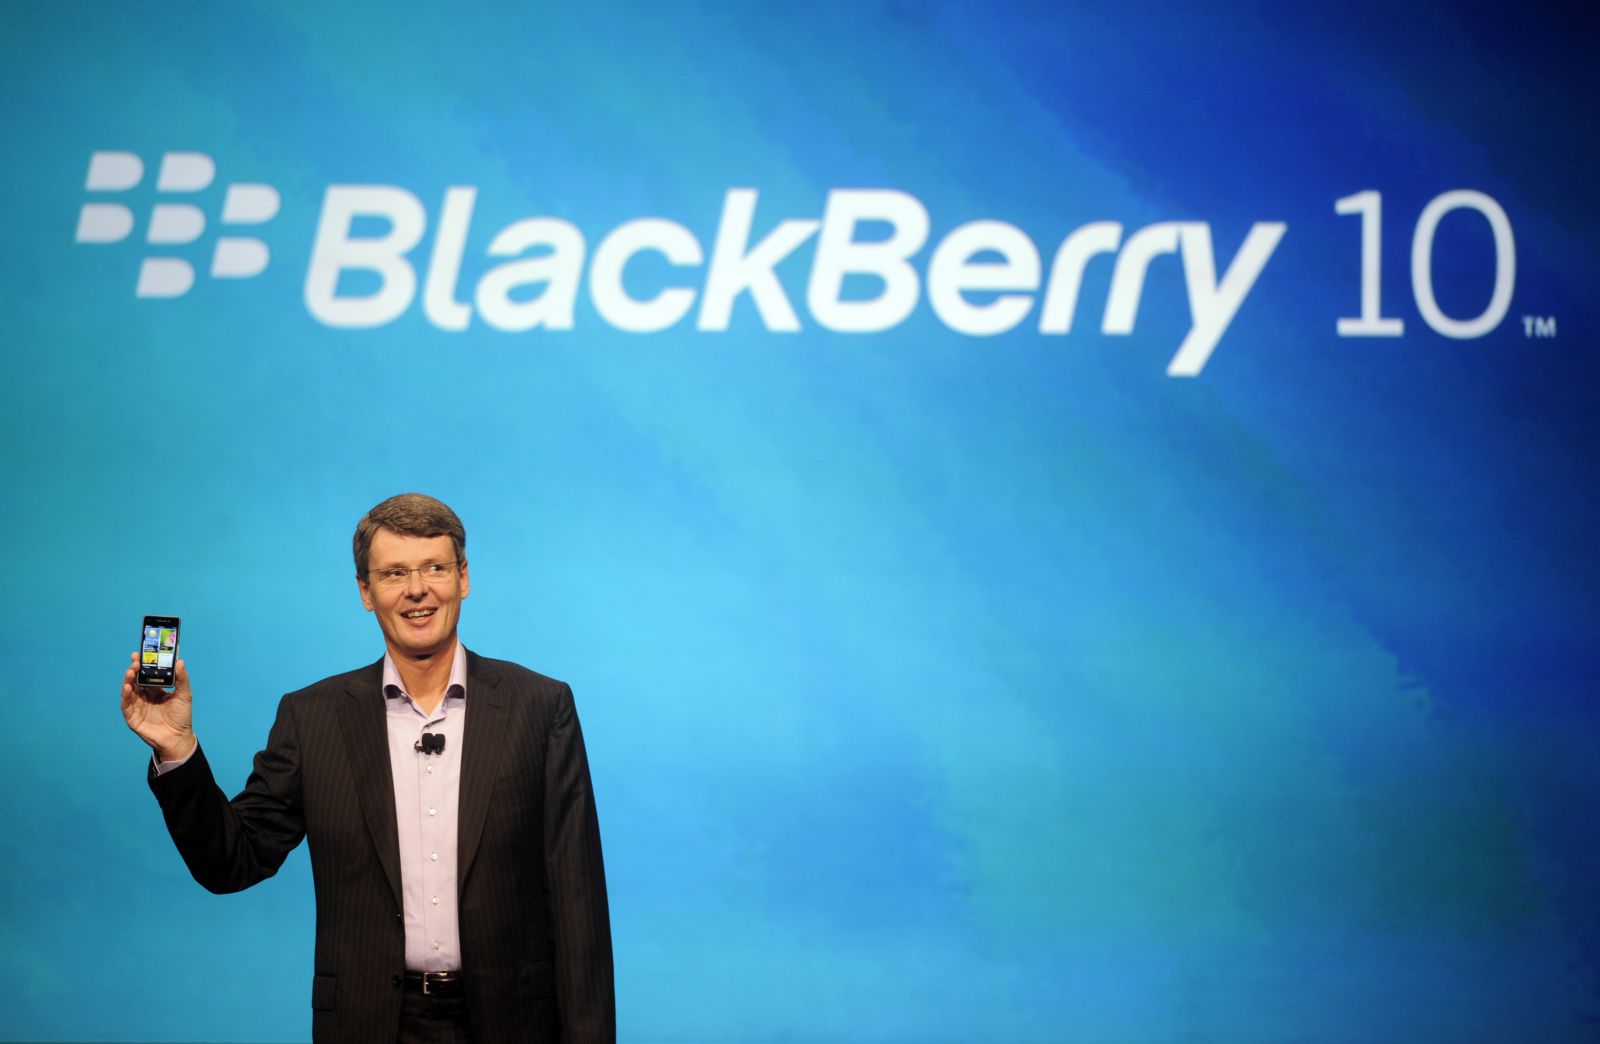 Will the New Blackberry Save RIMM?